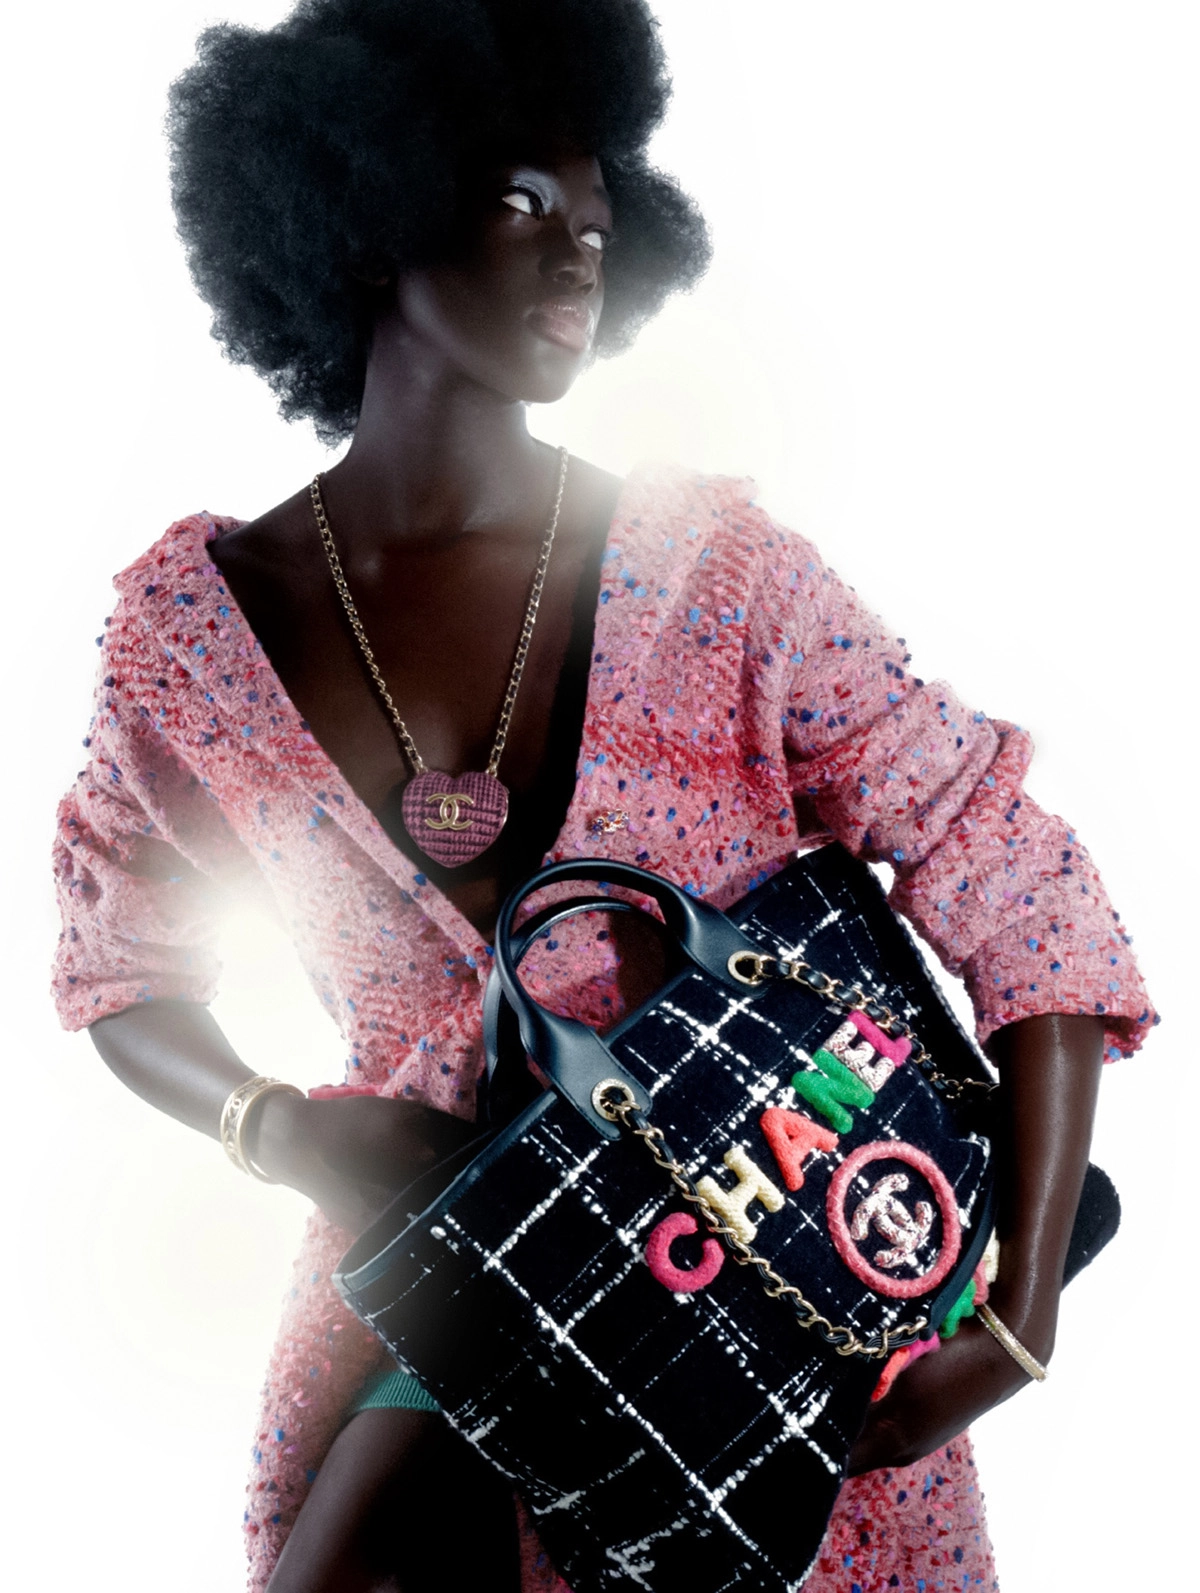 Nabou Thiam by Yis Kid for Elle UK September 2022